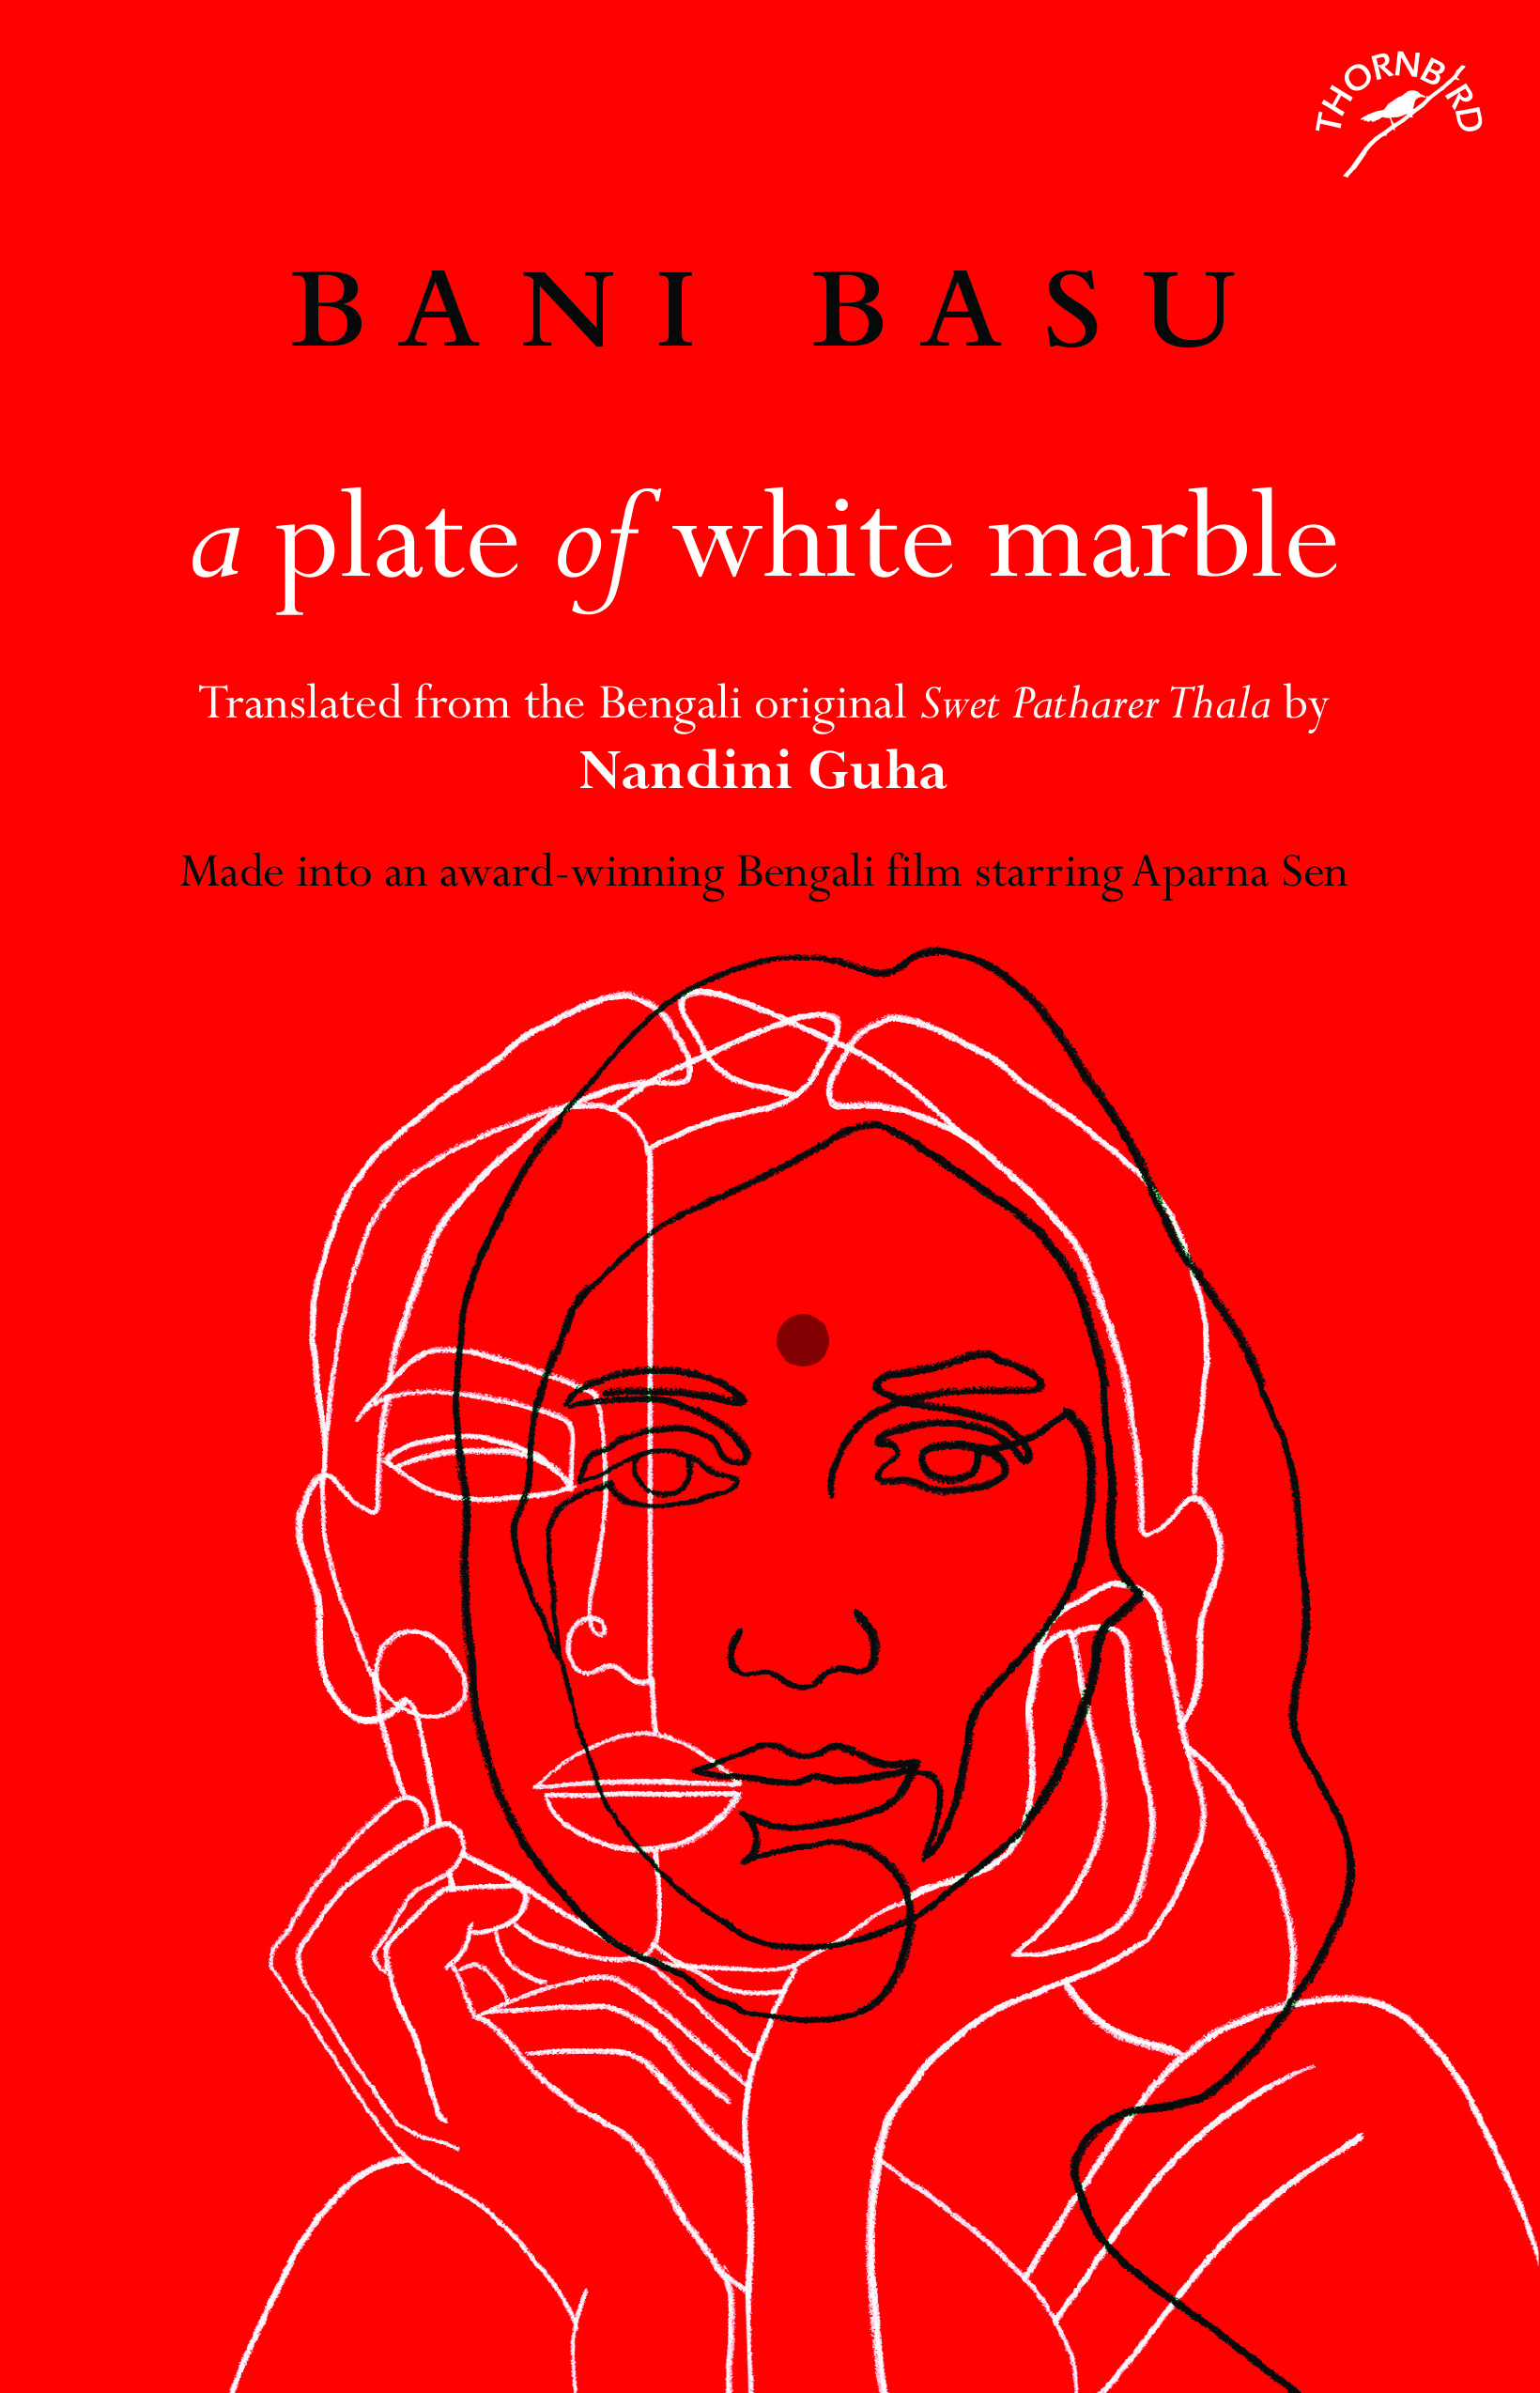 The book "A Plate of White Marble" talks about the struggles and liberation of the Indian woman